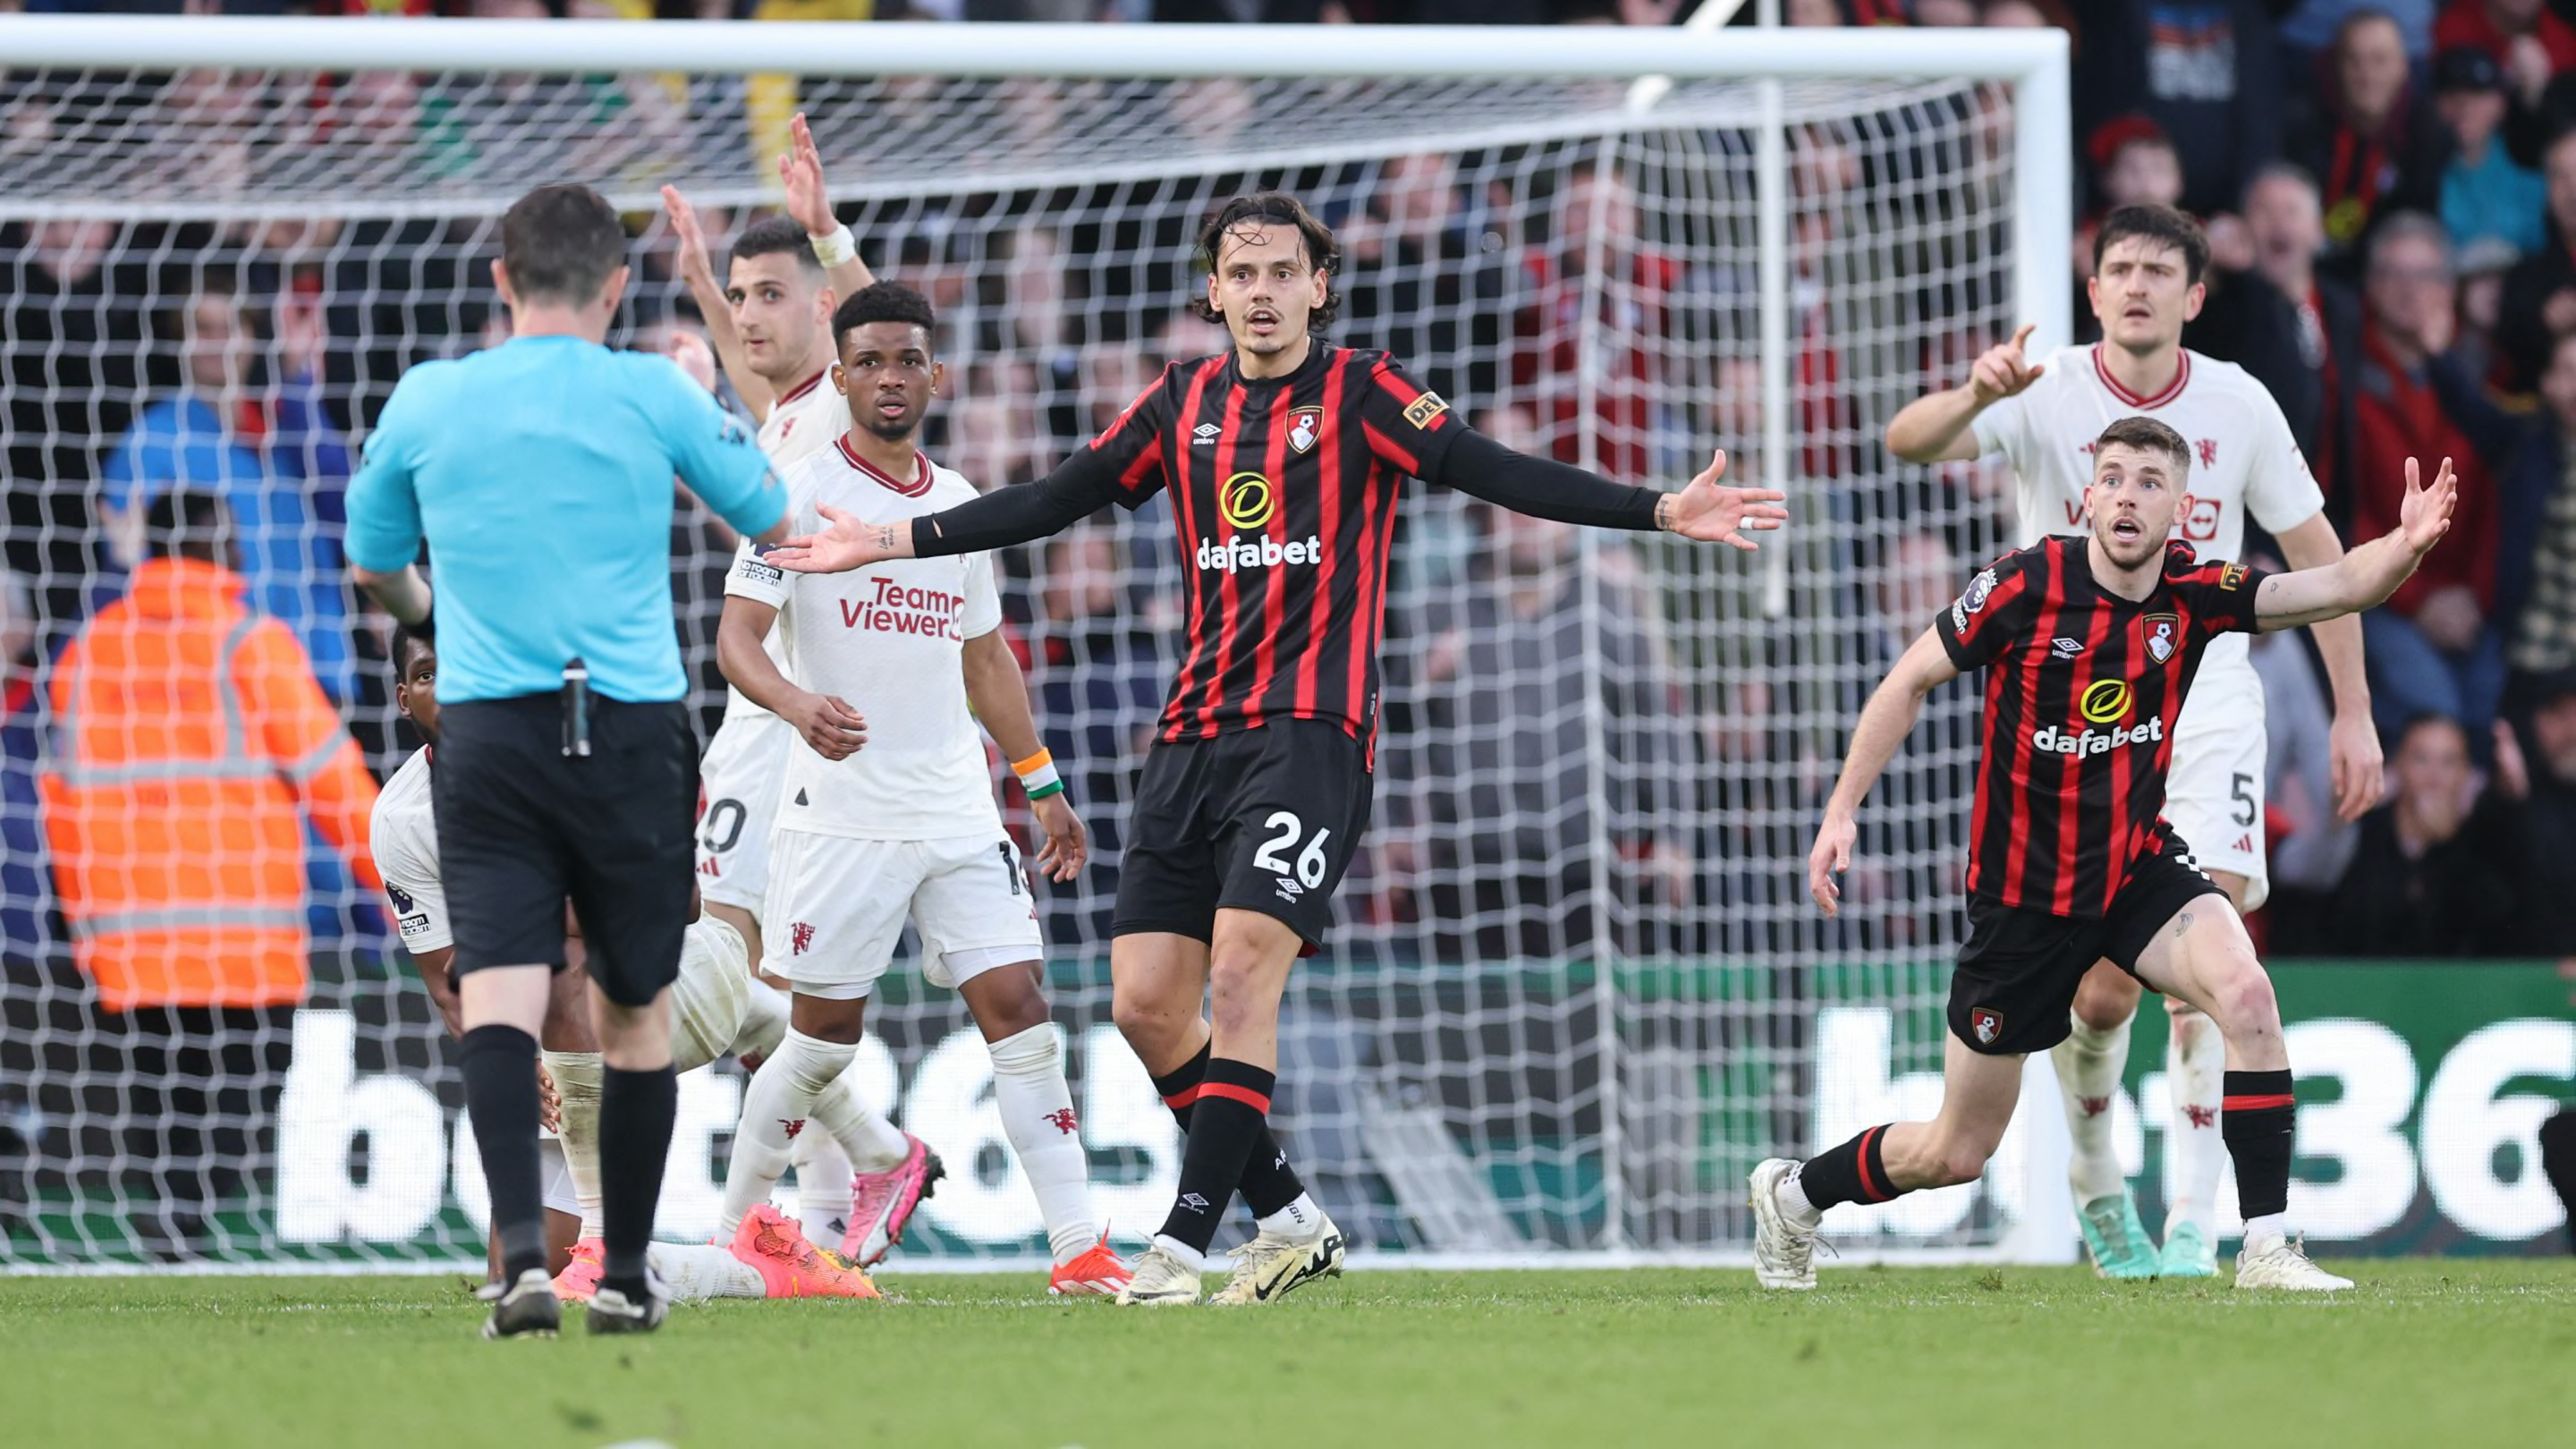 Bournemouth 2-2 Man Utd: Were the penalty decisions correct?